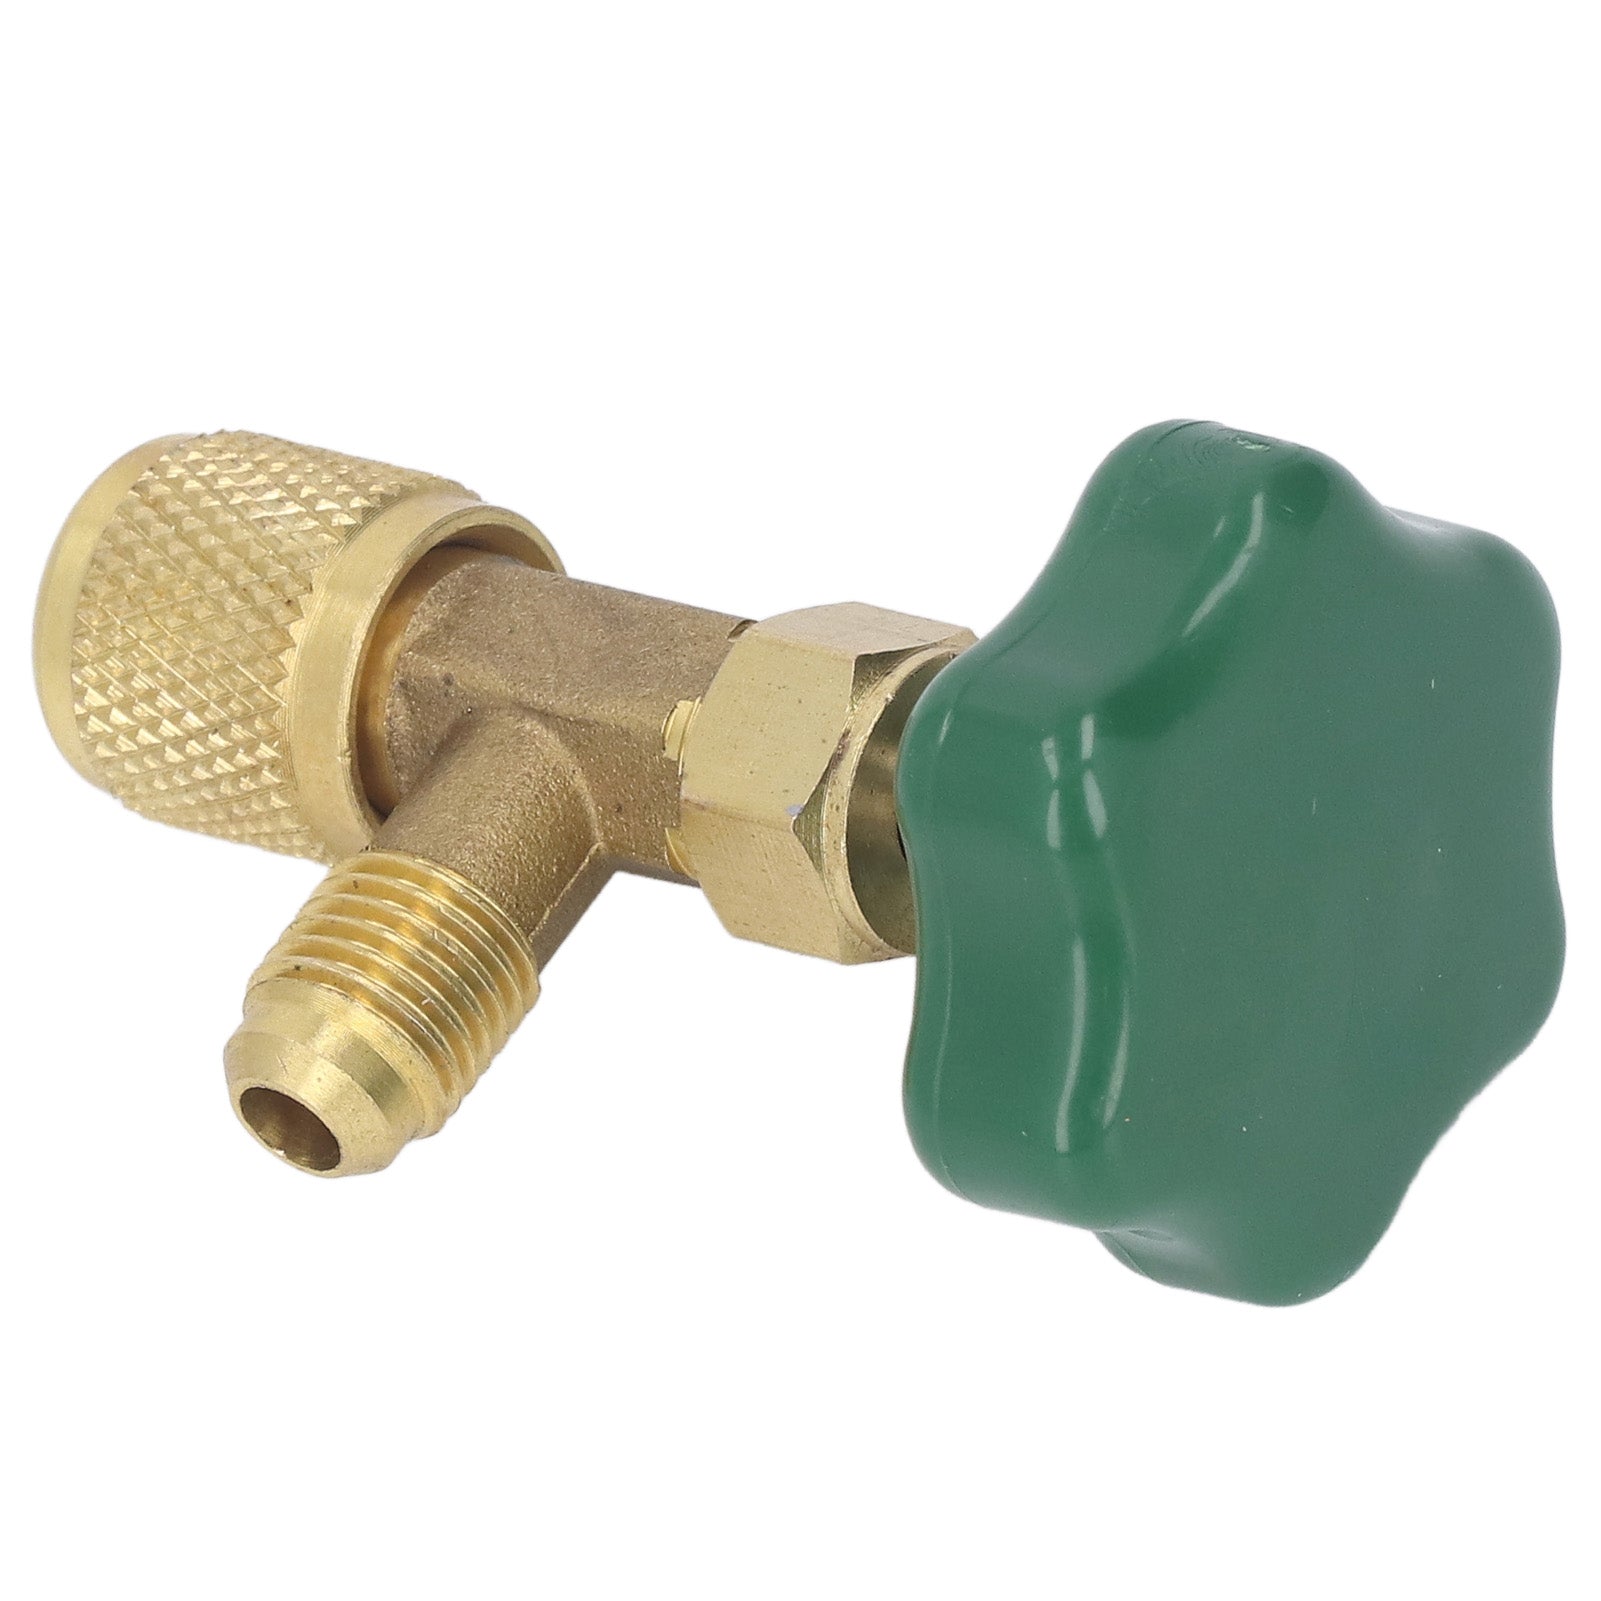 Air Conditioning Refrigerant Valve Copper ABS Leak Proof 1/4in SAE Refrigerant Tank Valve for Replacement